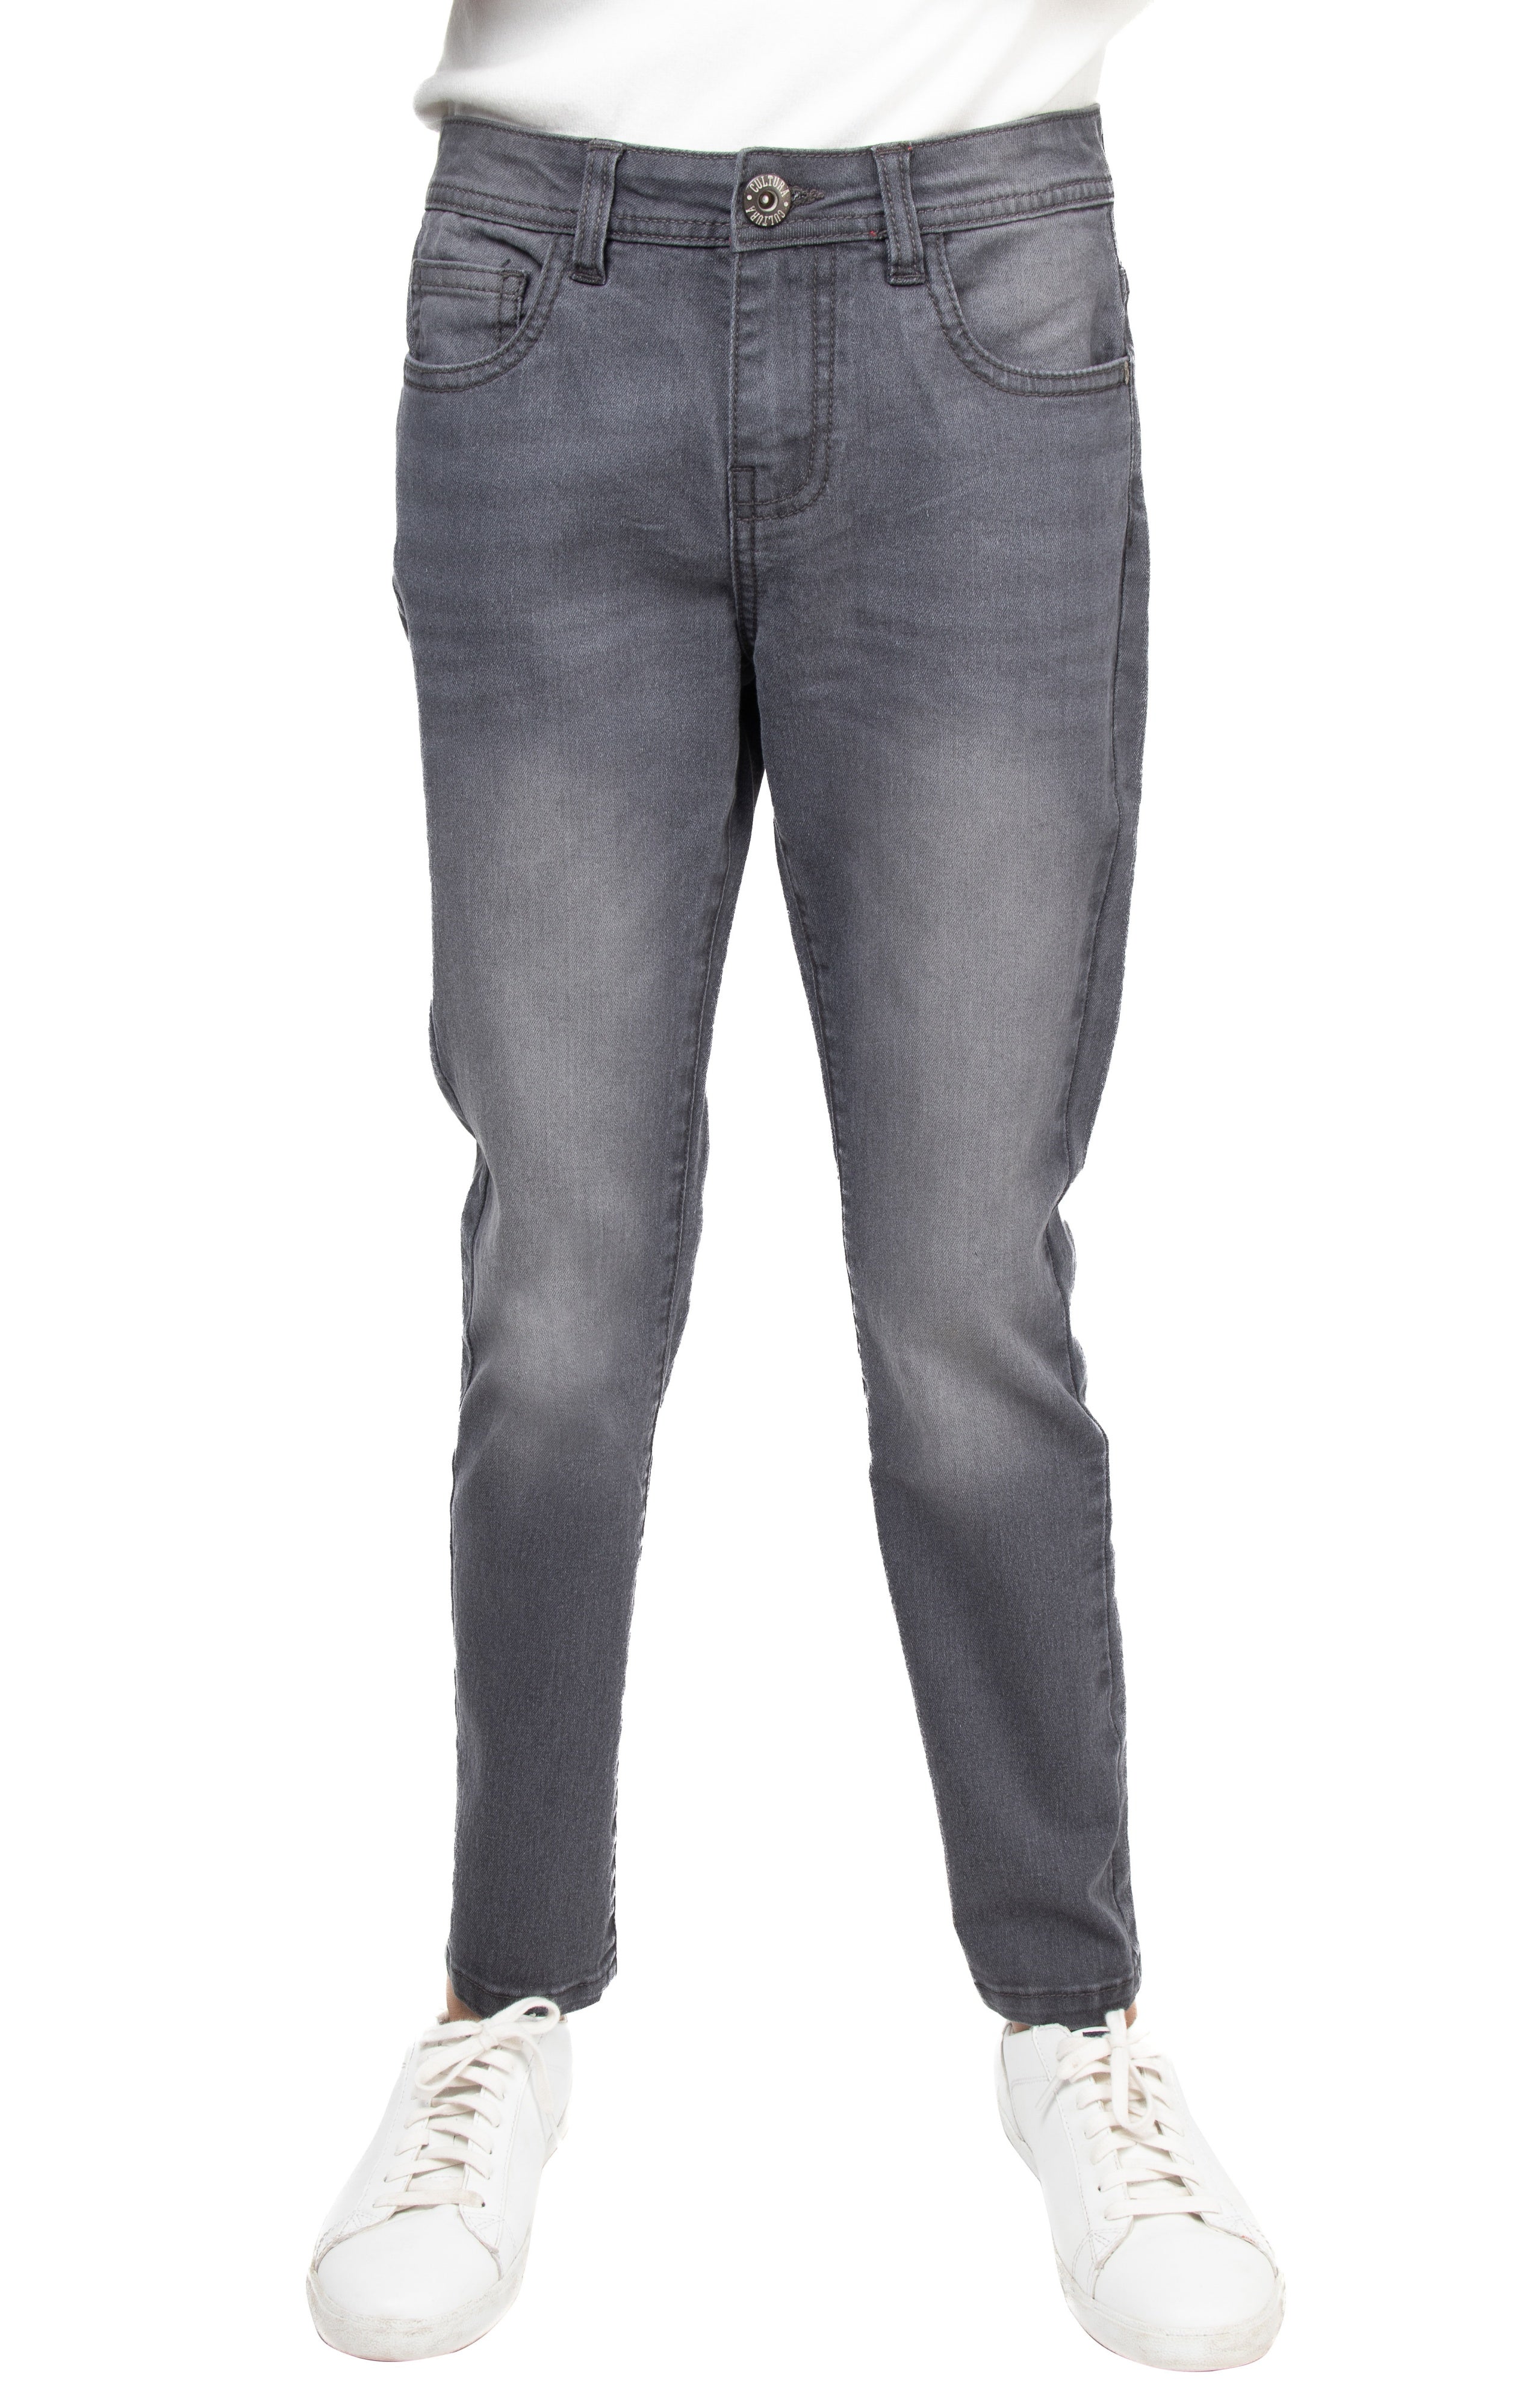 Men's Skinny Jeans: Comfortable & Stretch Fit